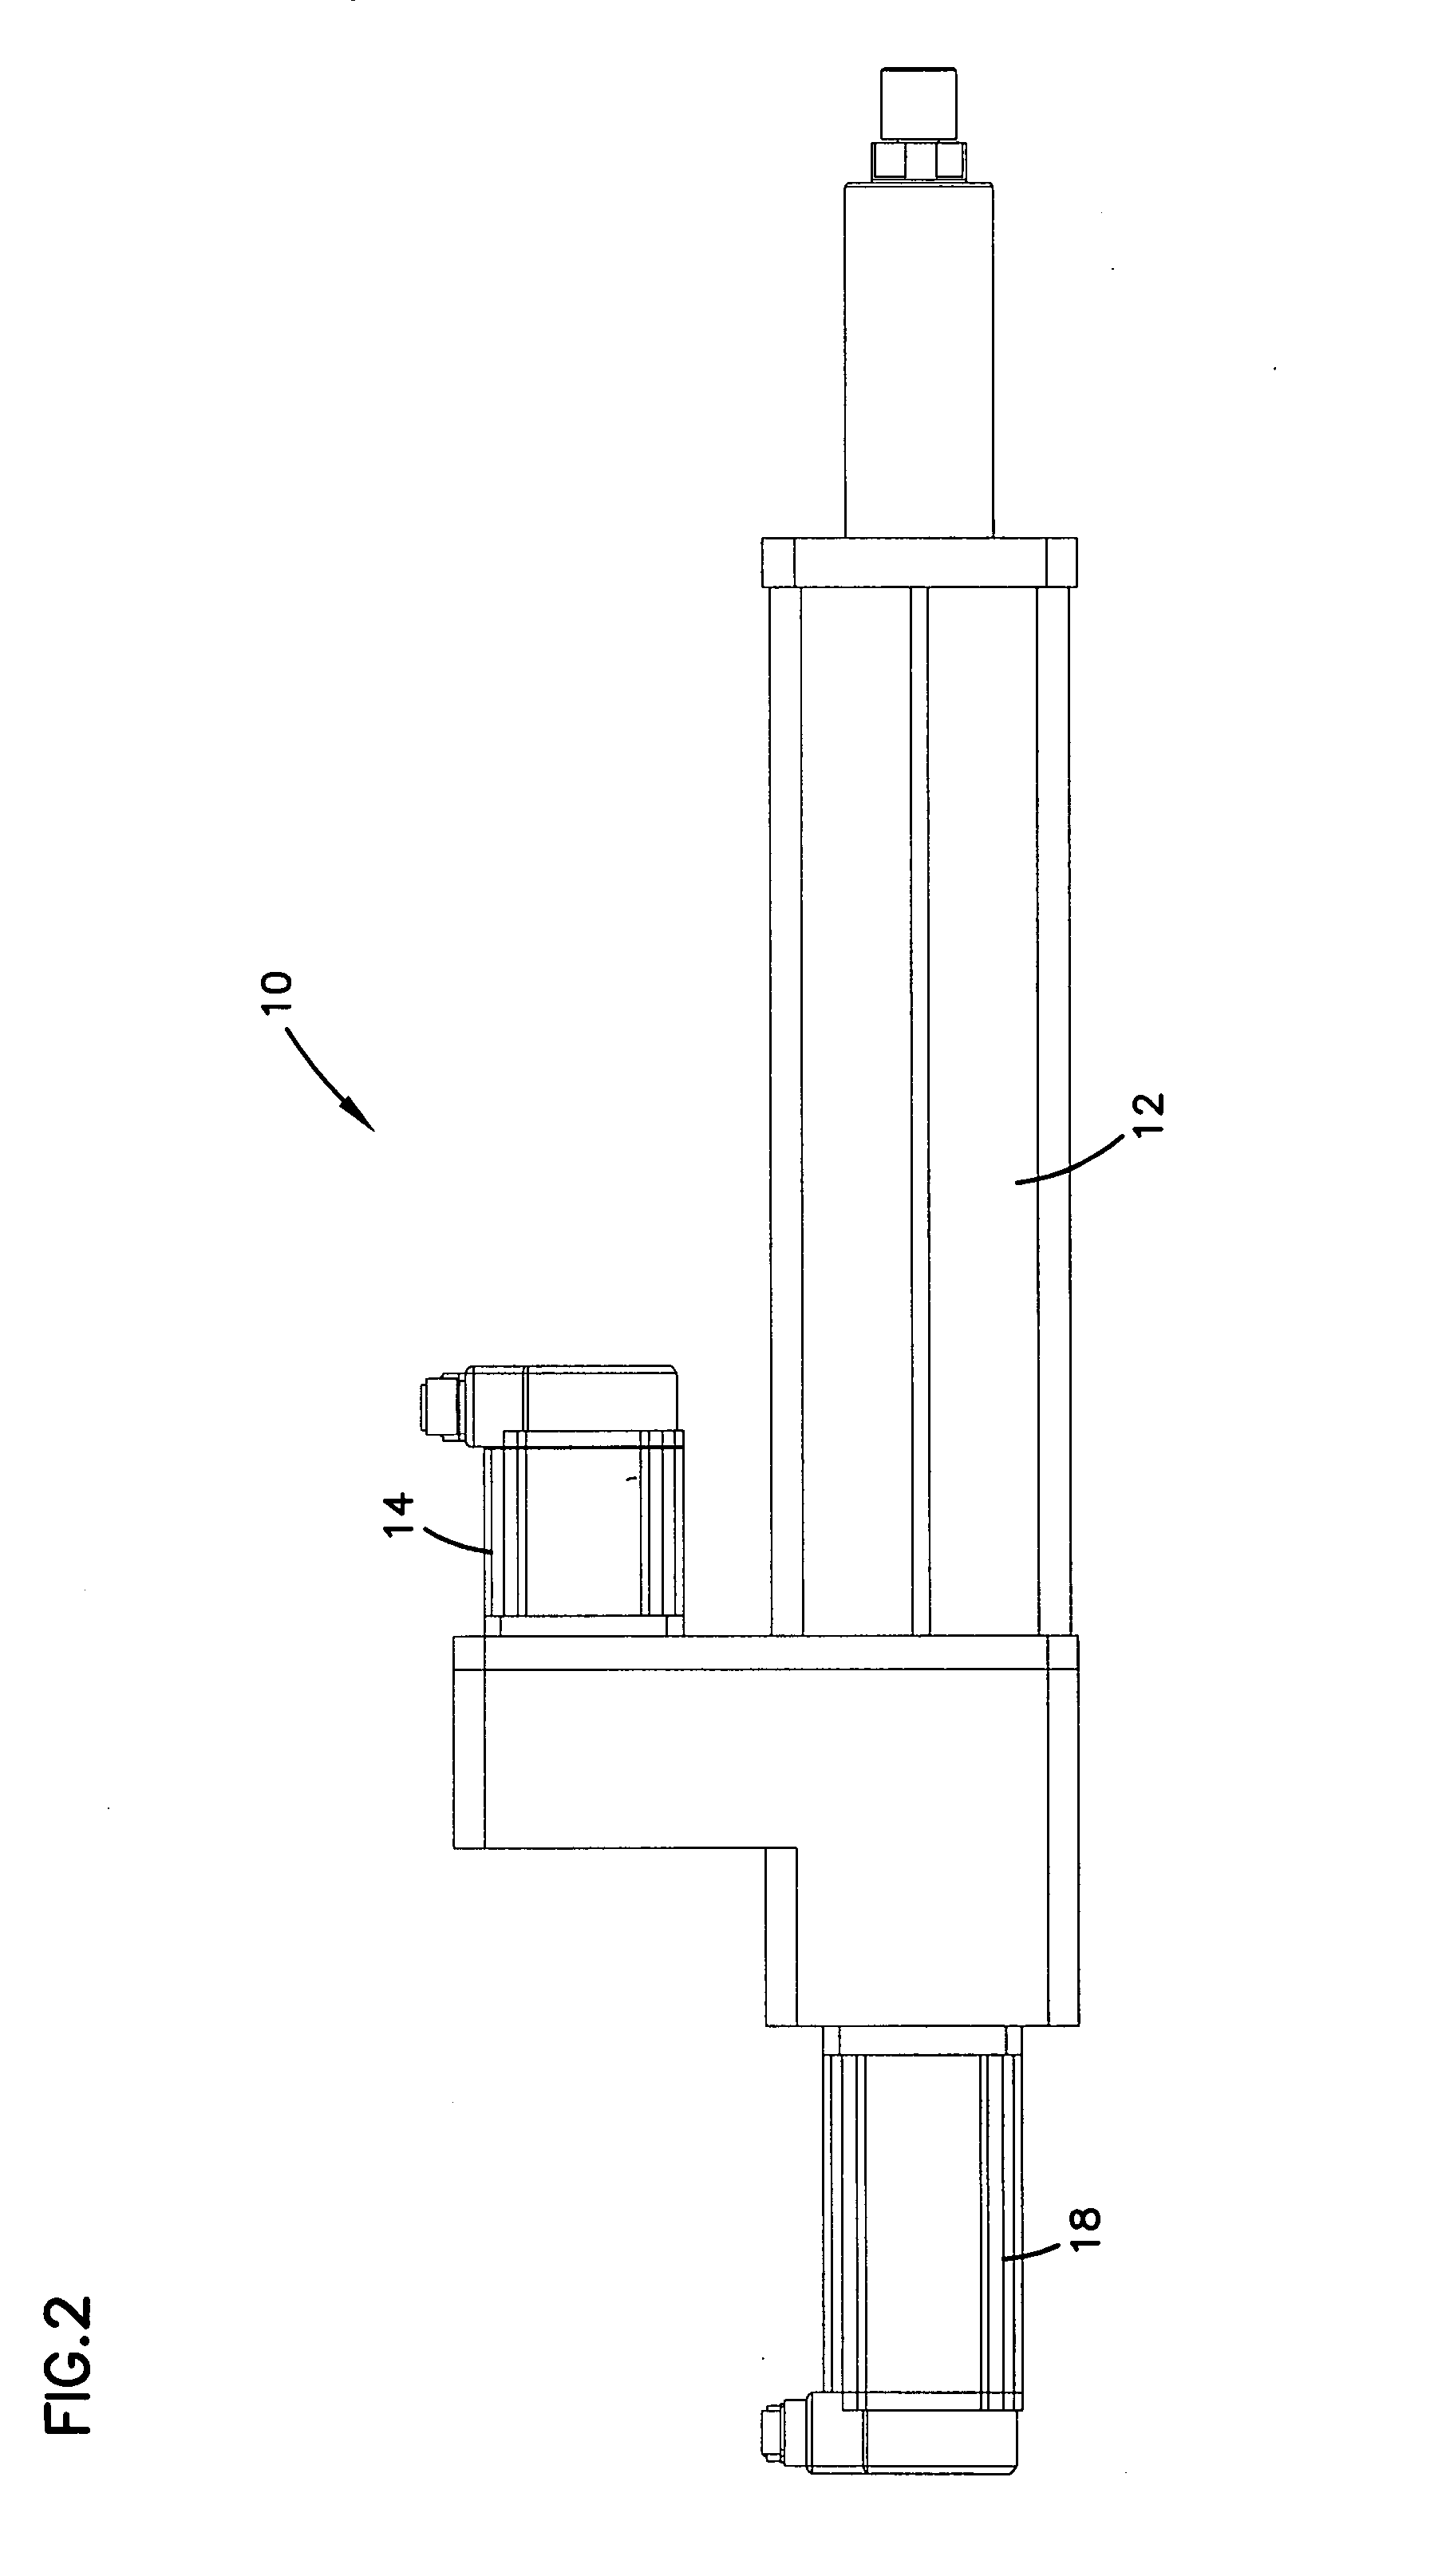 Linear actuator system and method